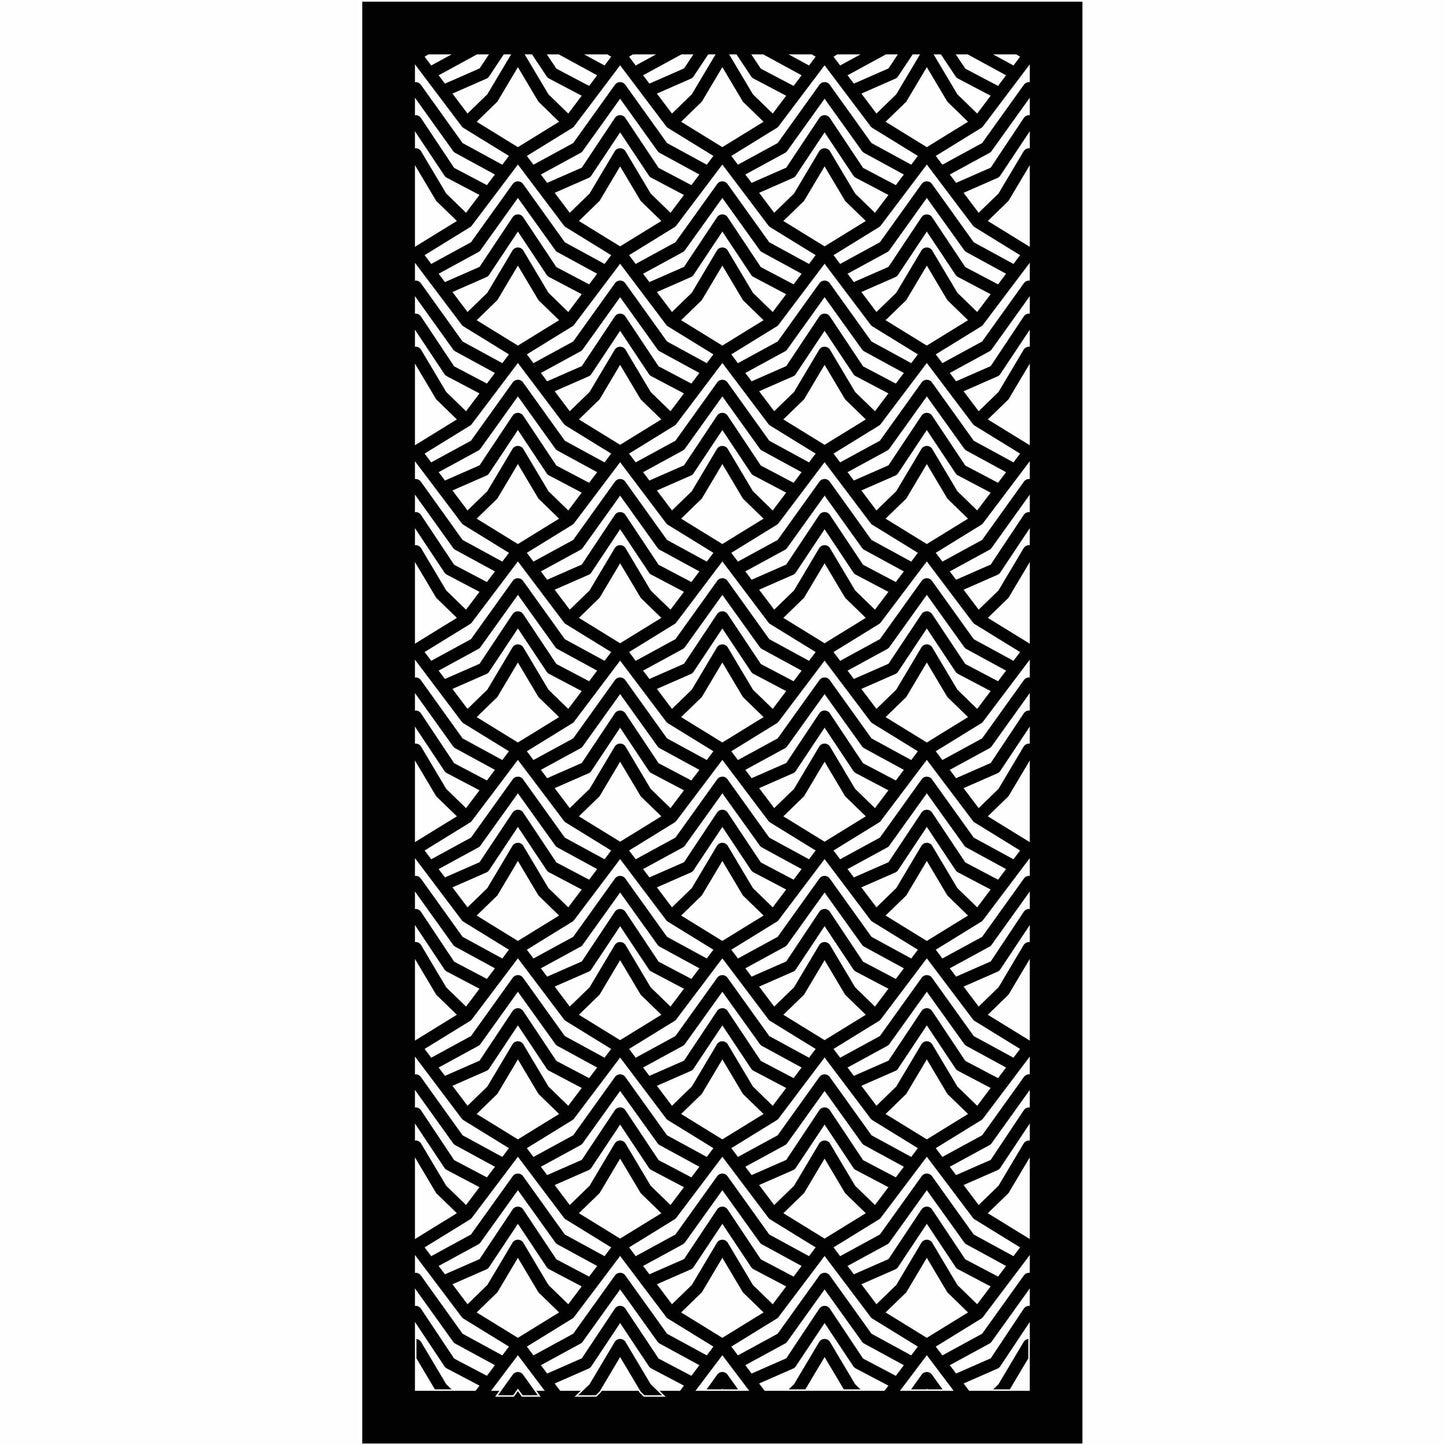 Abstract and Floral Decorative Privacy Screen Panels Doors or Fence-Free DXF files Cut Ready CNC Designs-dxfforcnc.com